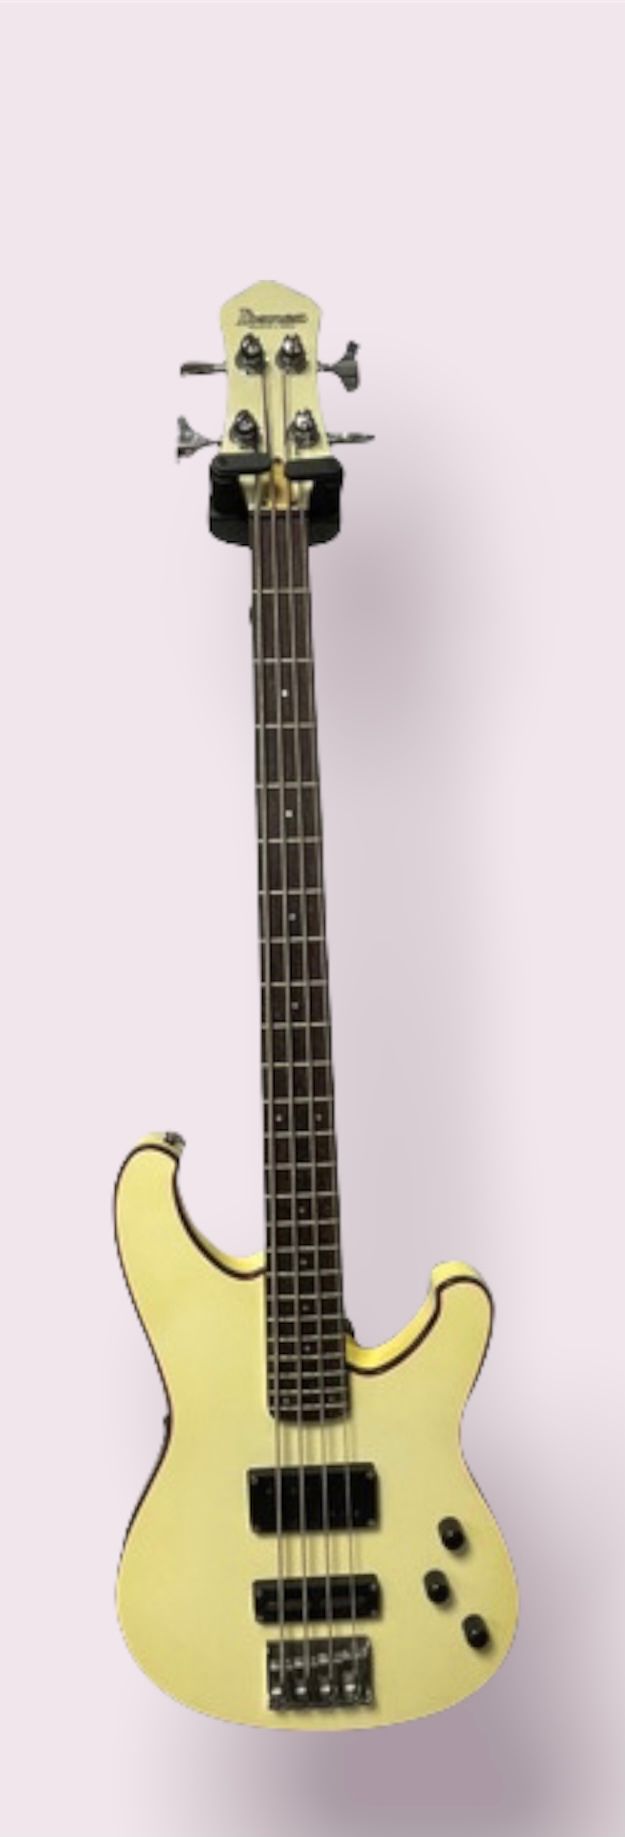 Null ELECTRIC BASS GUITAR, IBANEZ ROADSTAR II SERIES

Cream with red and black p&hellip;